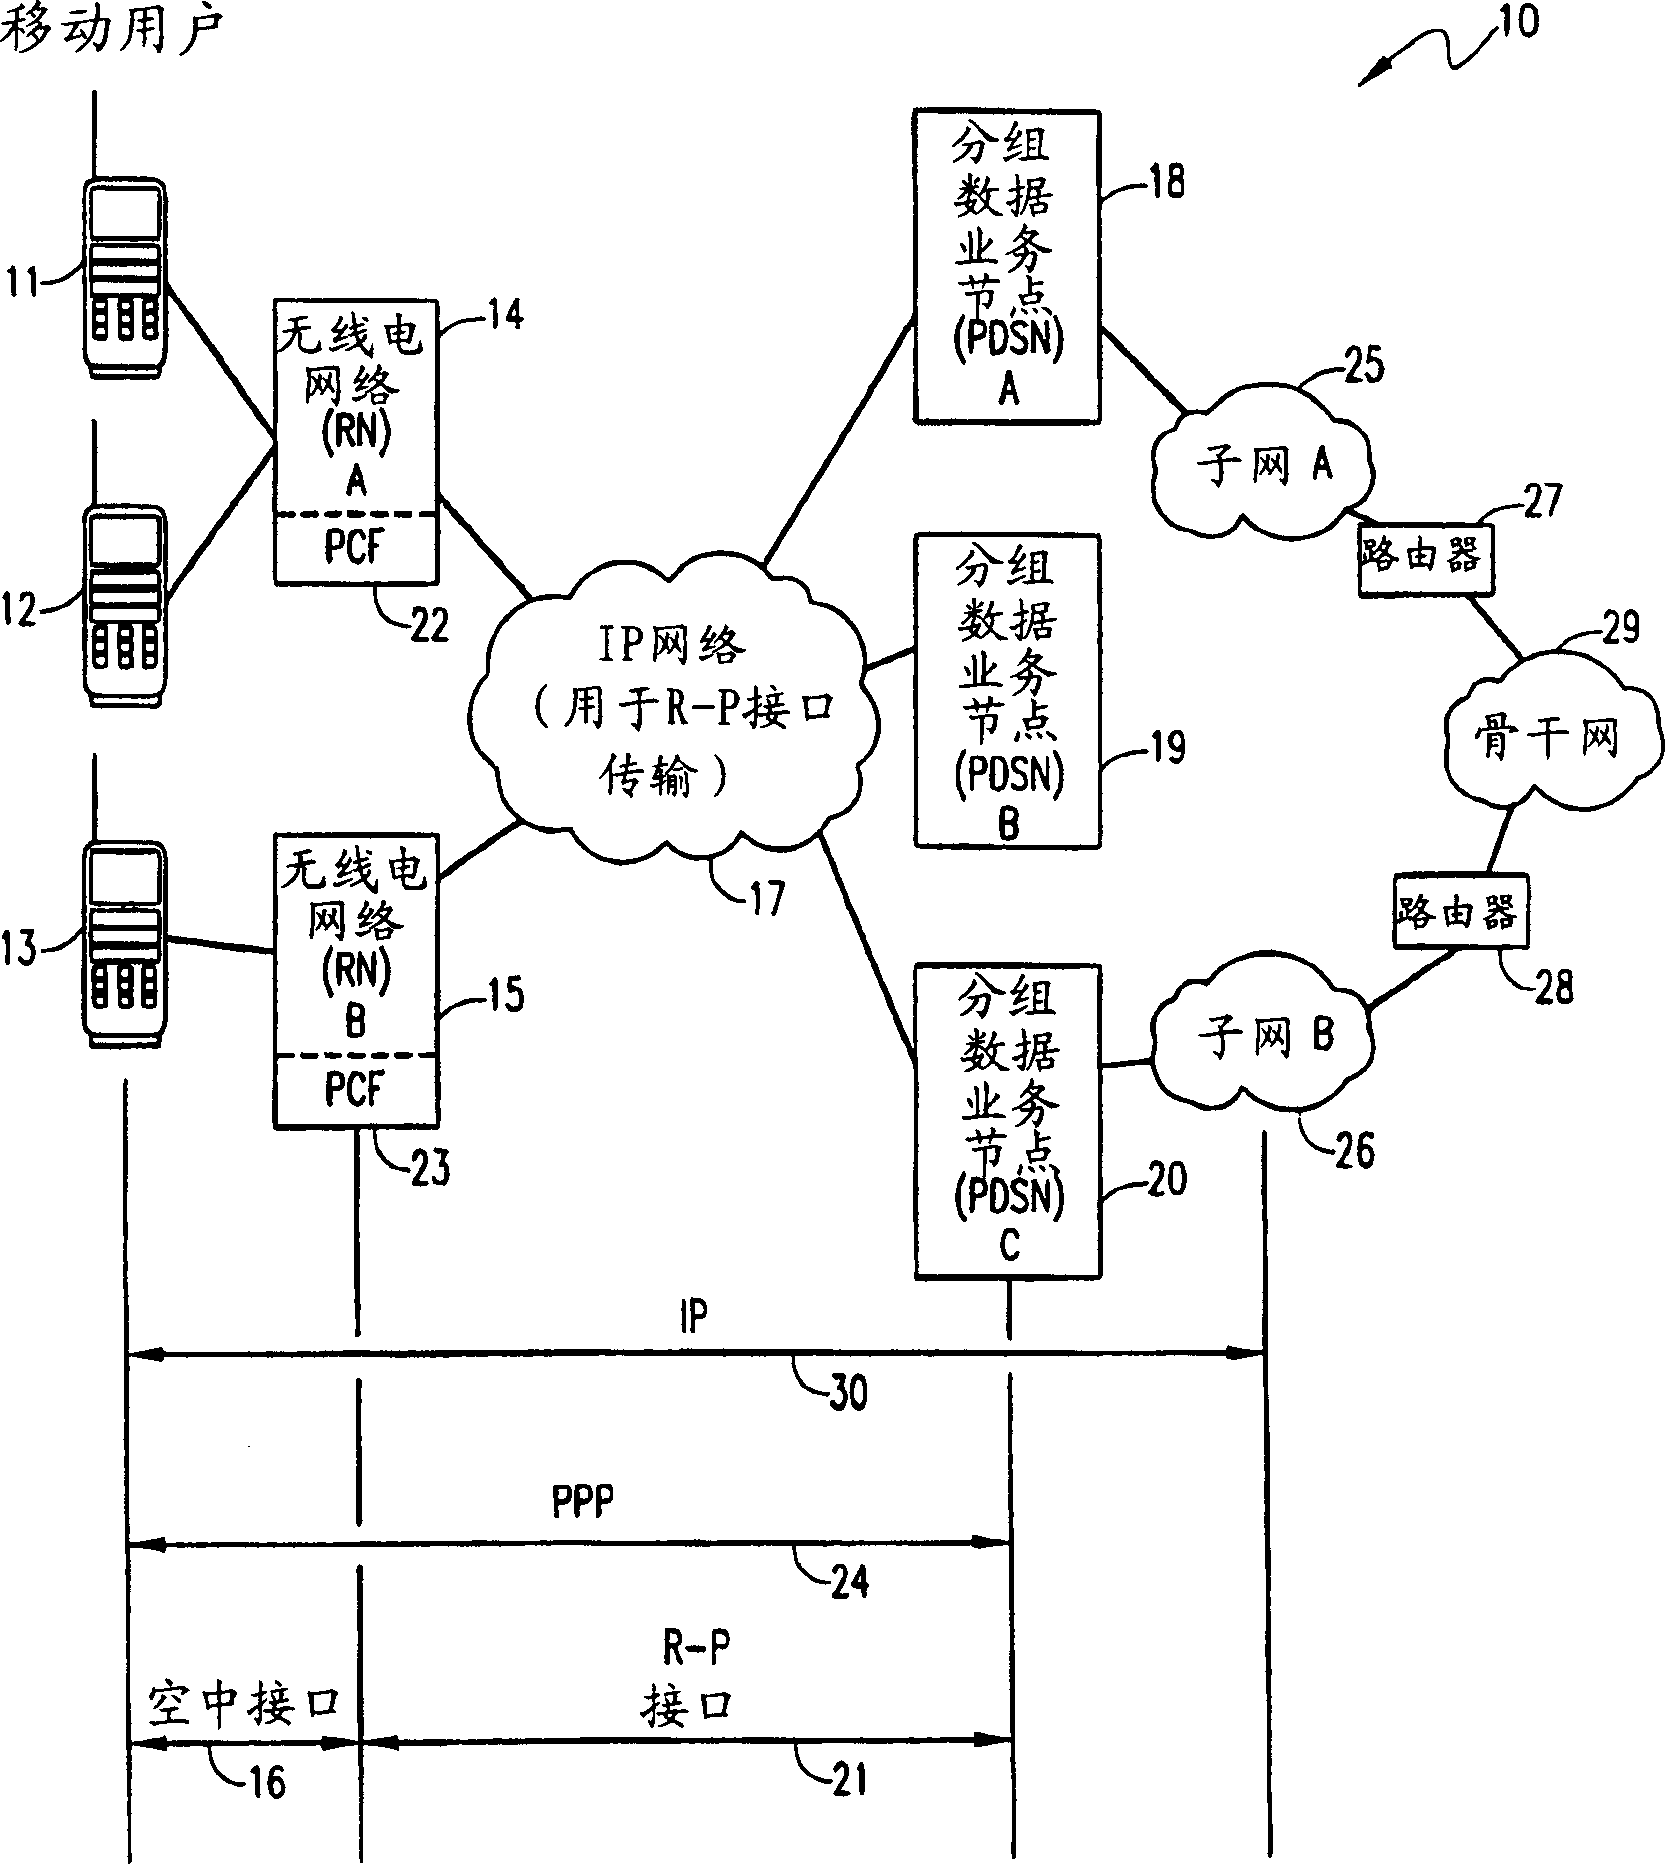 Packet core function and method of selecting packet data service node/foreign agent in packet data network